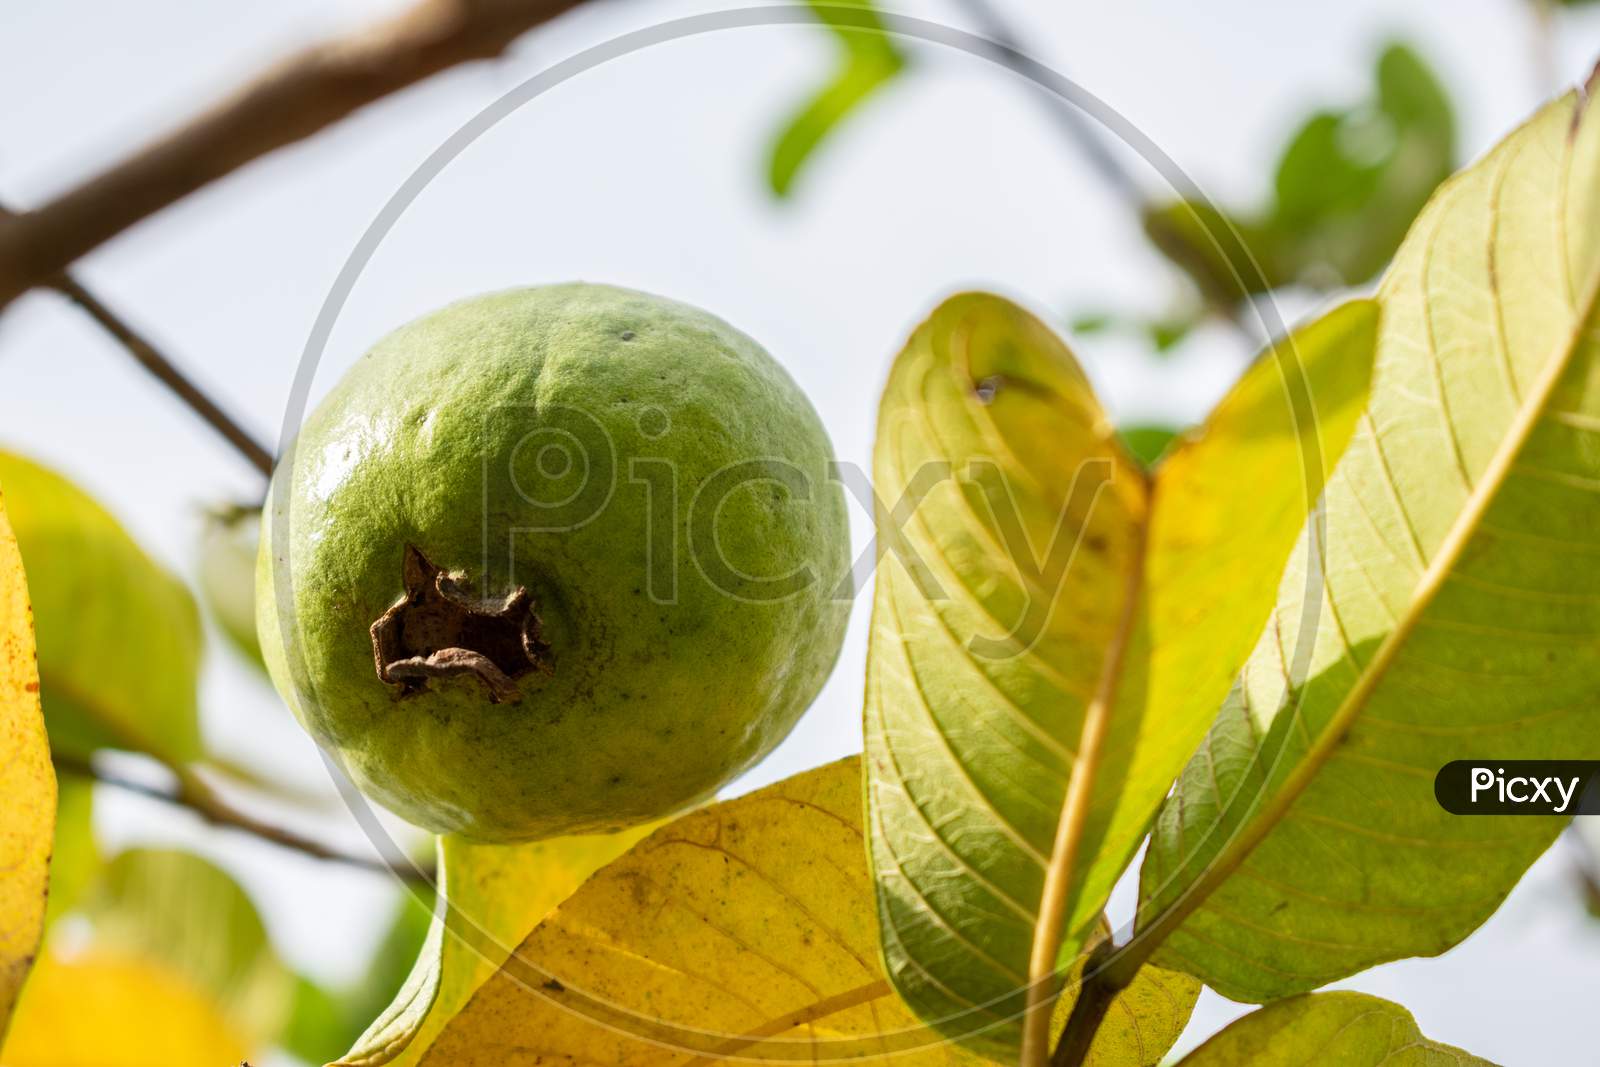 guavas on a guava's tree